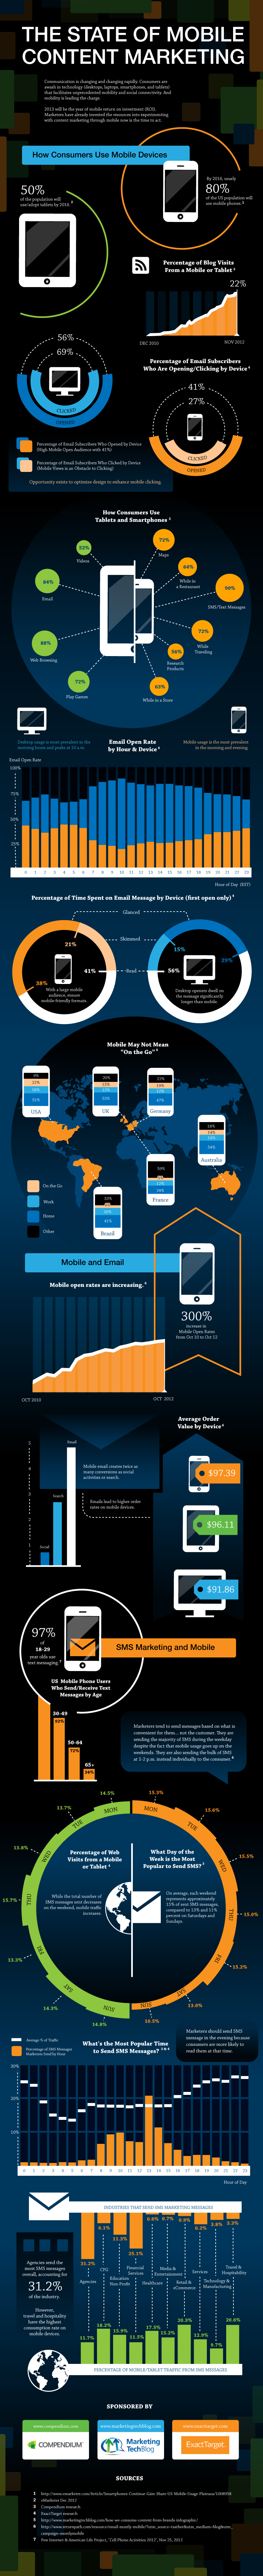 The state of mobile content marketing infographic – click for larger version